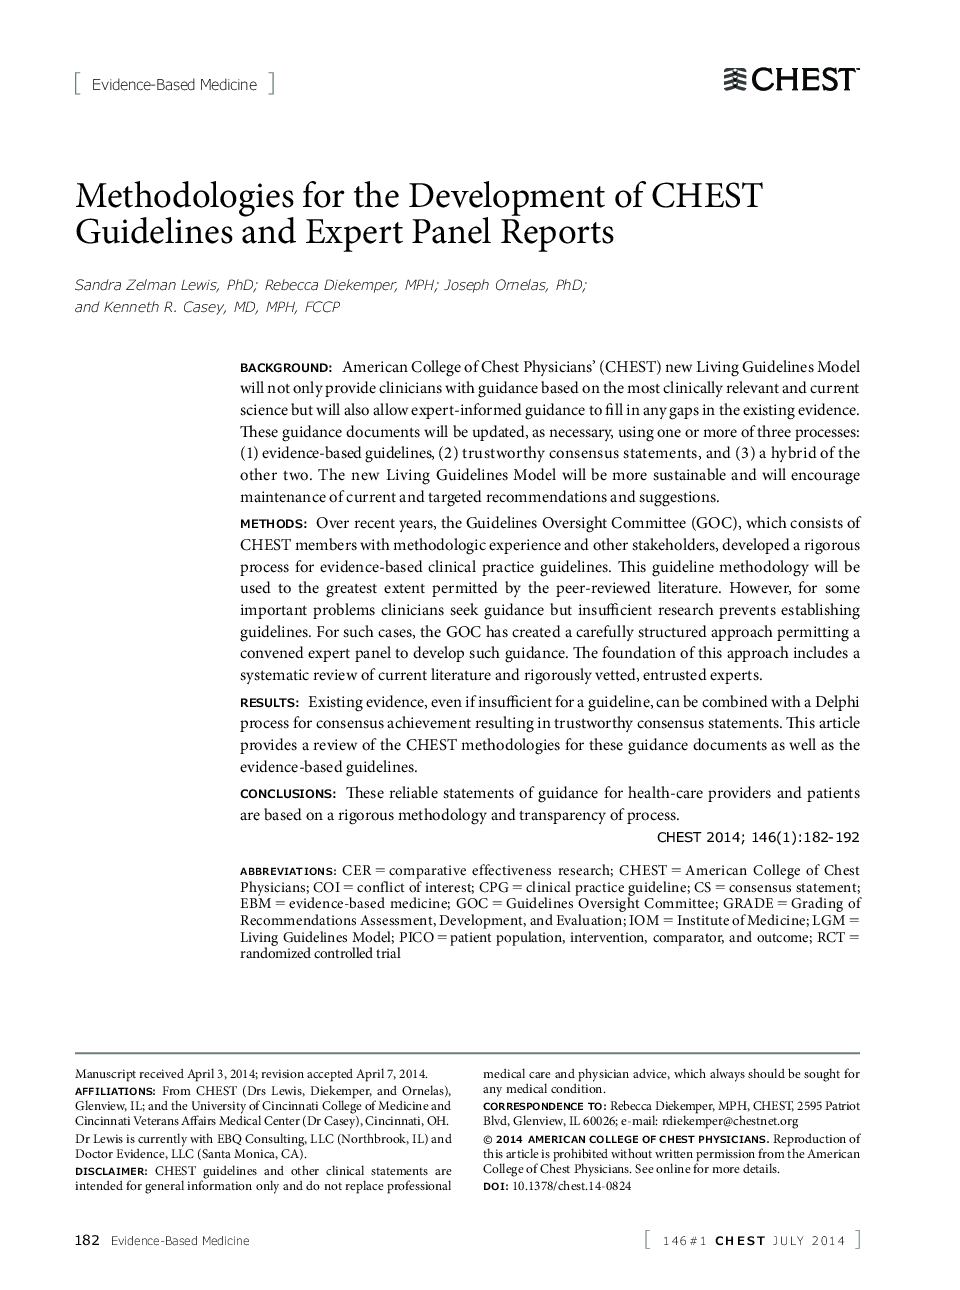 Methodologies for the Development of CHEST Guidelines and Expert Panel Reports